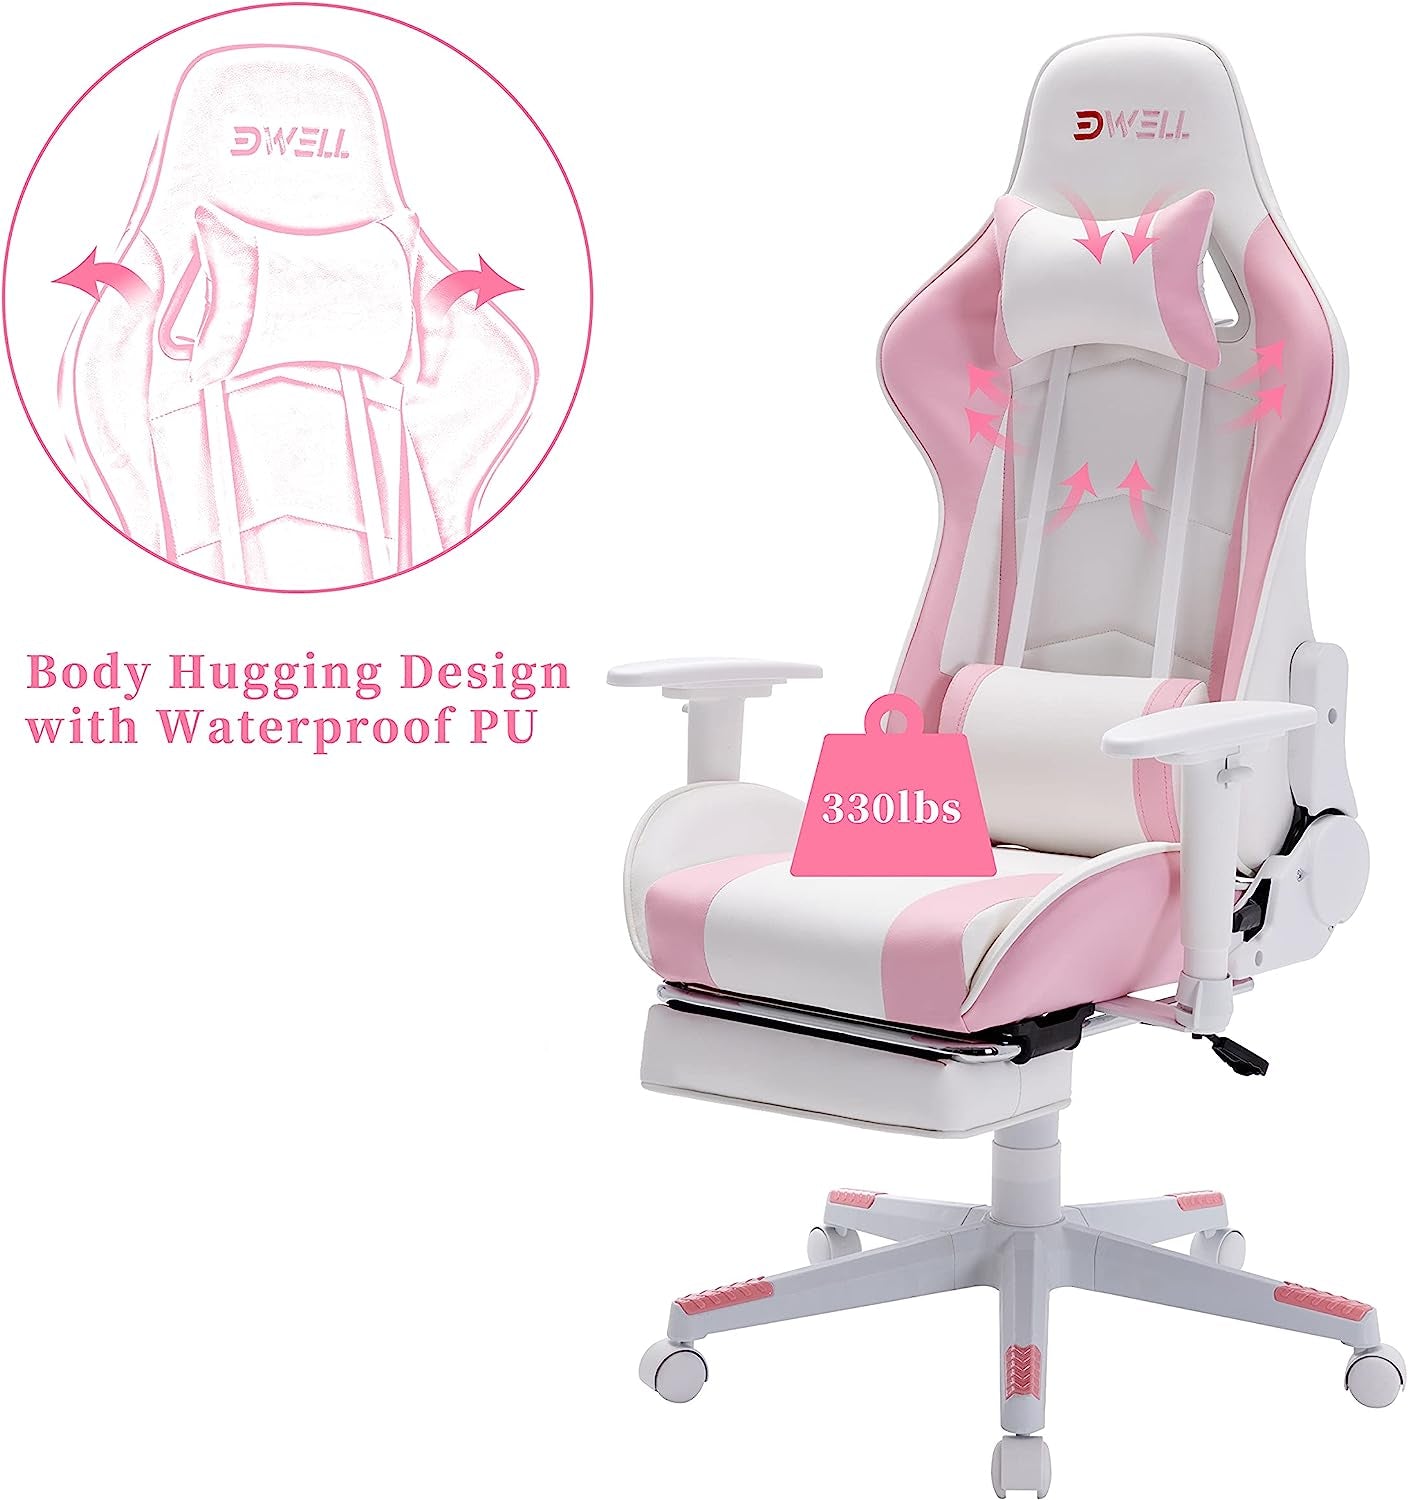 Pink Gaming Chair, Computer Chair,Gamer Chair,Gaming Chair with Footrest,Gaming Chair for Adults,High Back Office Chair with Headrest and Massage Lumbar Support